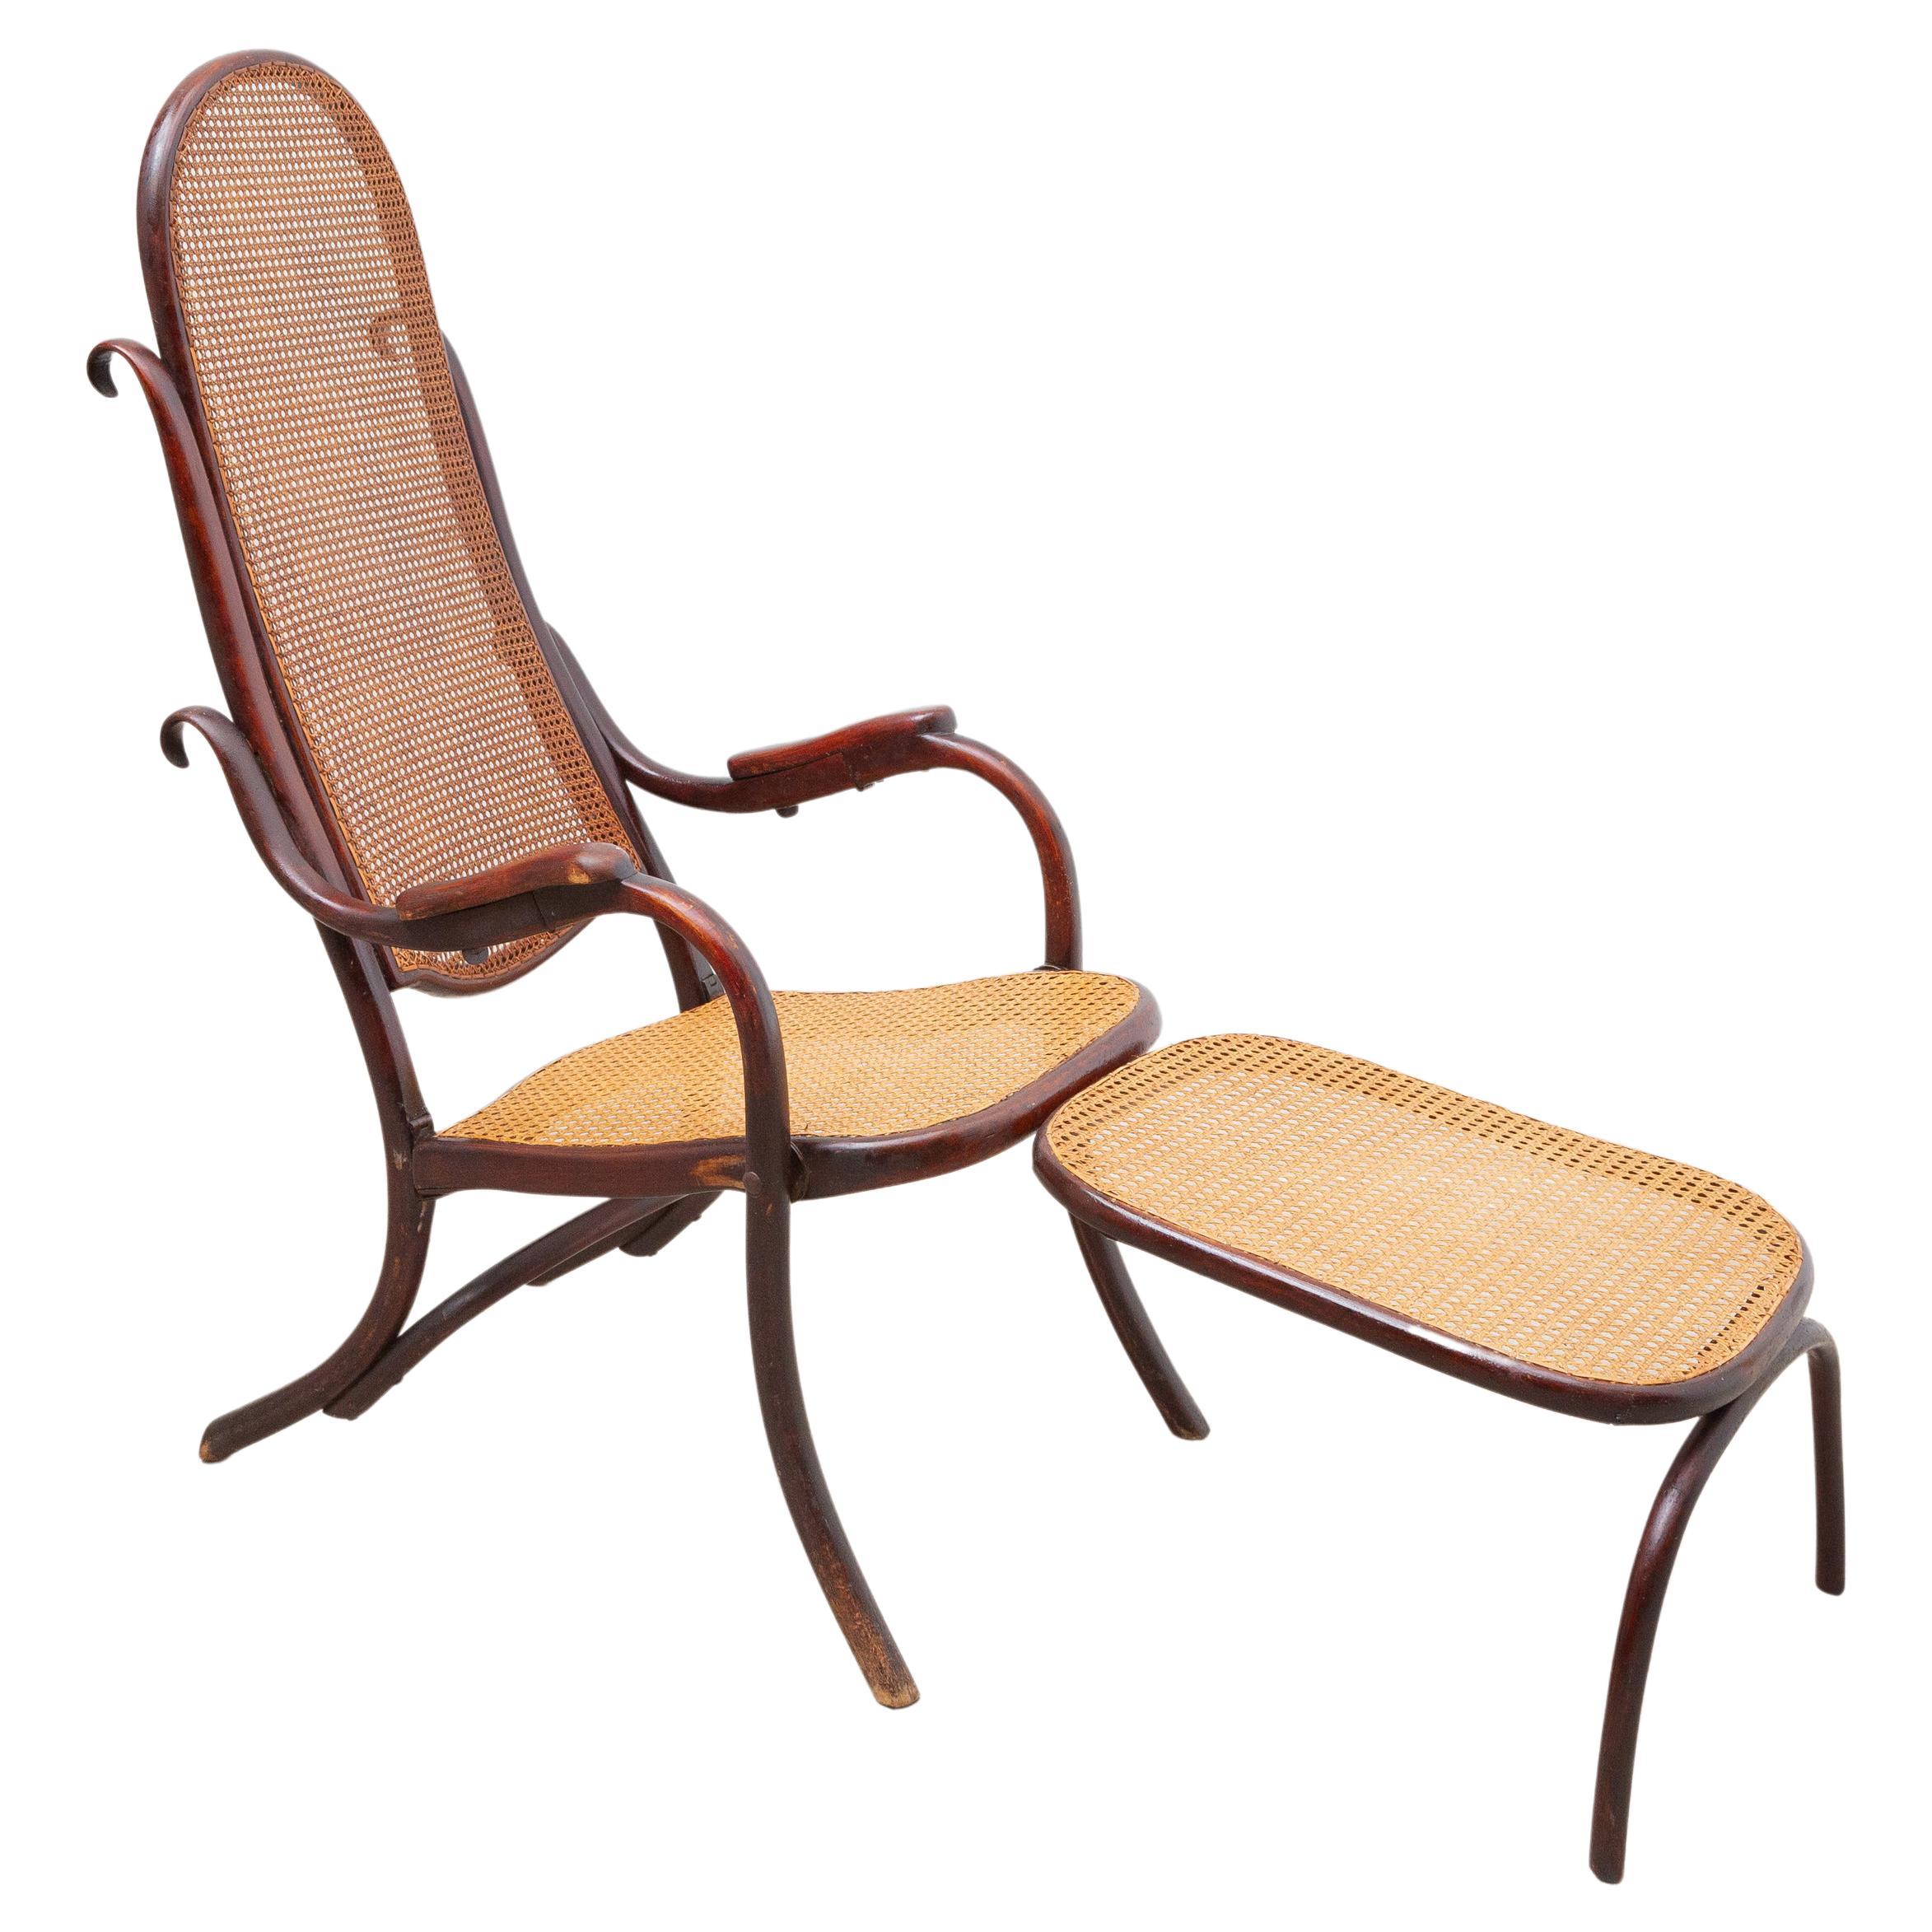 https://a.1stdibscdn.com/folding-lounge-chair-by-thonet-with-adjustable-footstool-19th-century-for-sale/f_9318/f_276496021646548517870/f_27649602_1646548518687_bg_processed.jpg